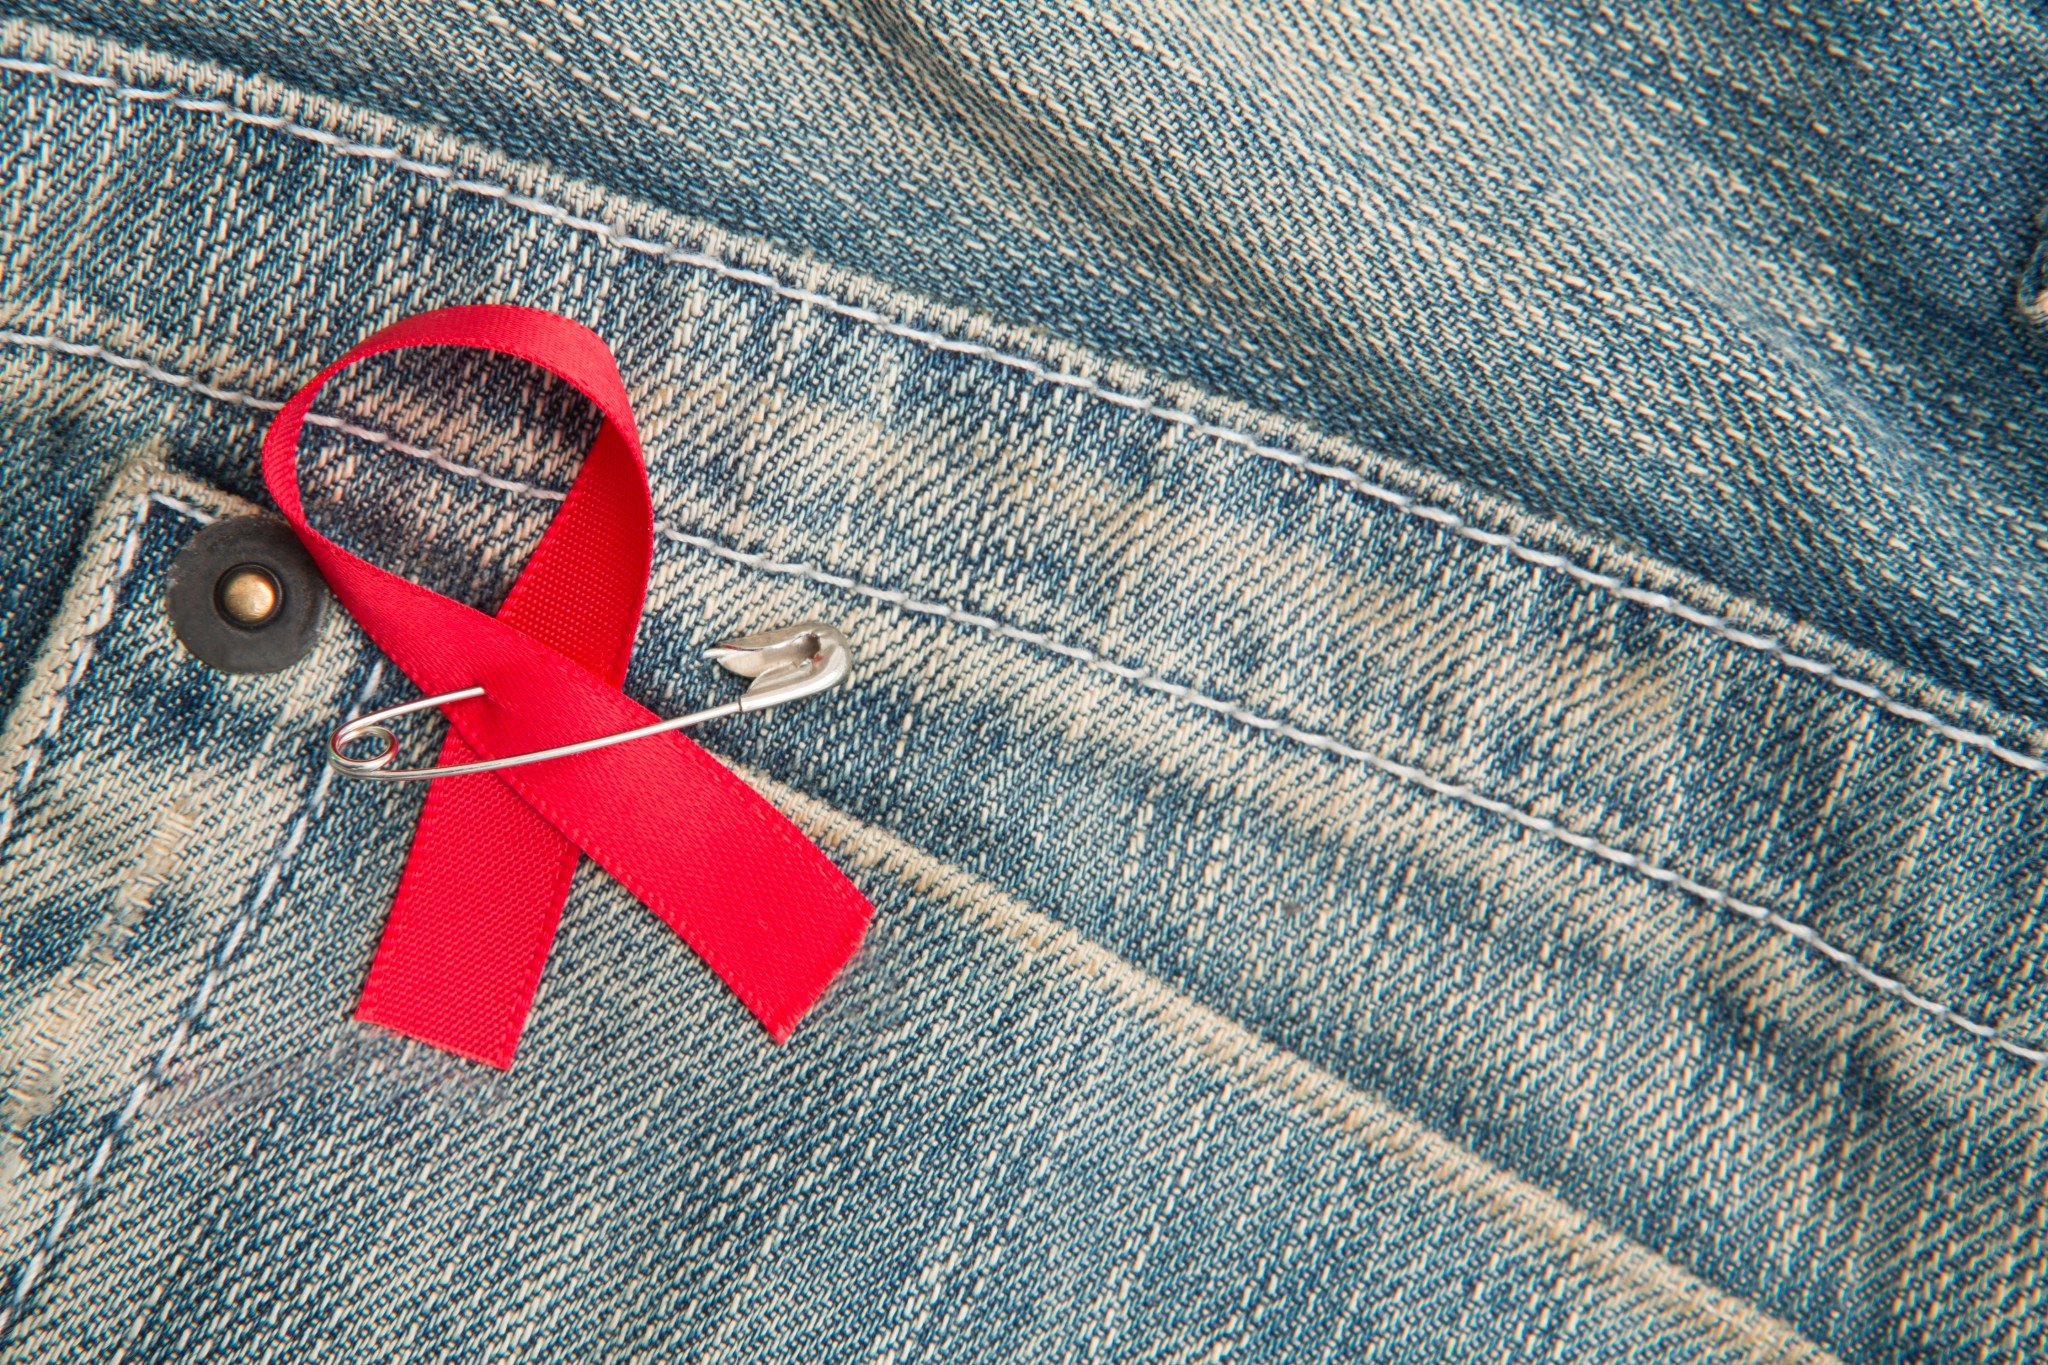 HIV red ribbon pinned to jeans pocket